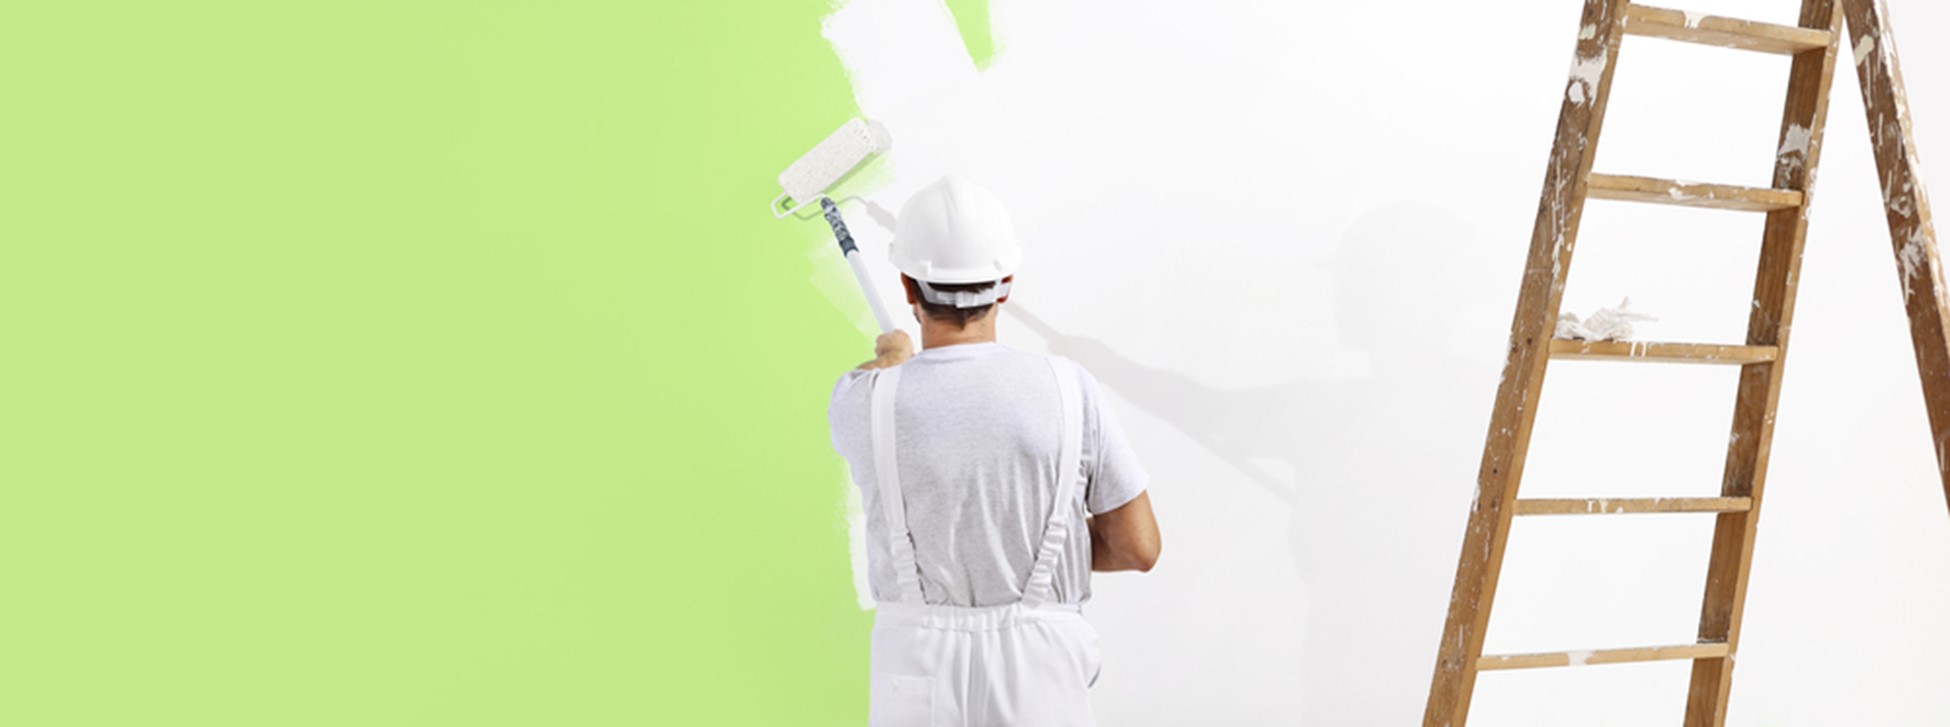 painter man at work with a paint roller, wall painting green color ecological concept.